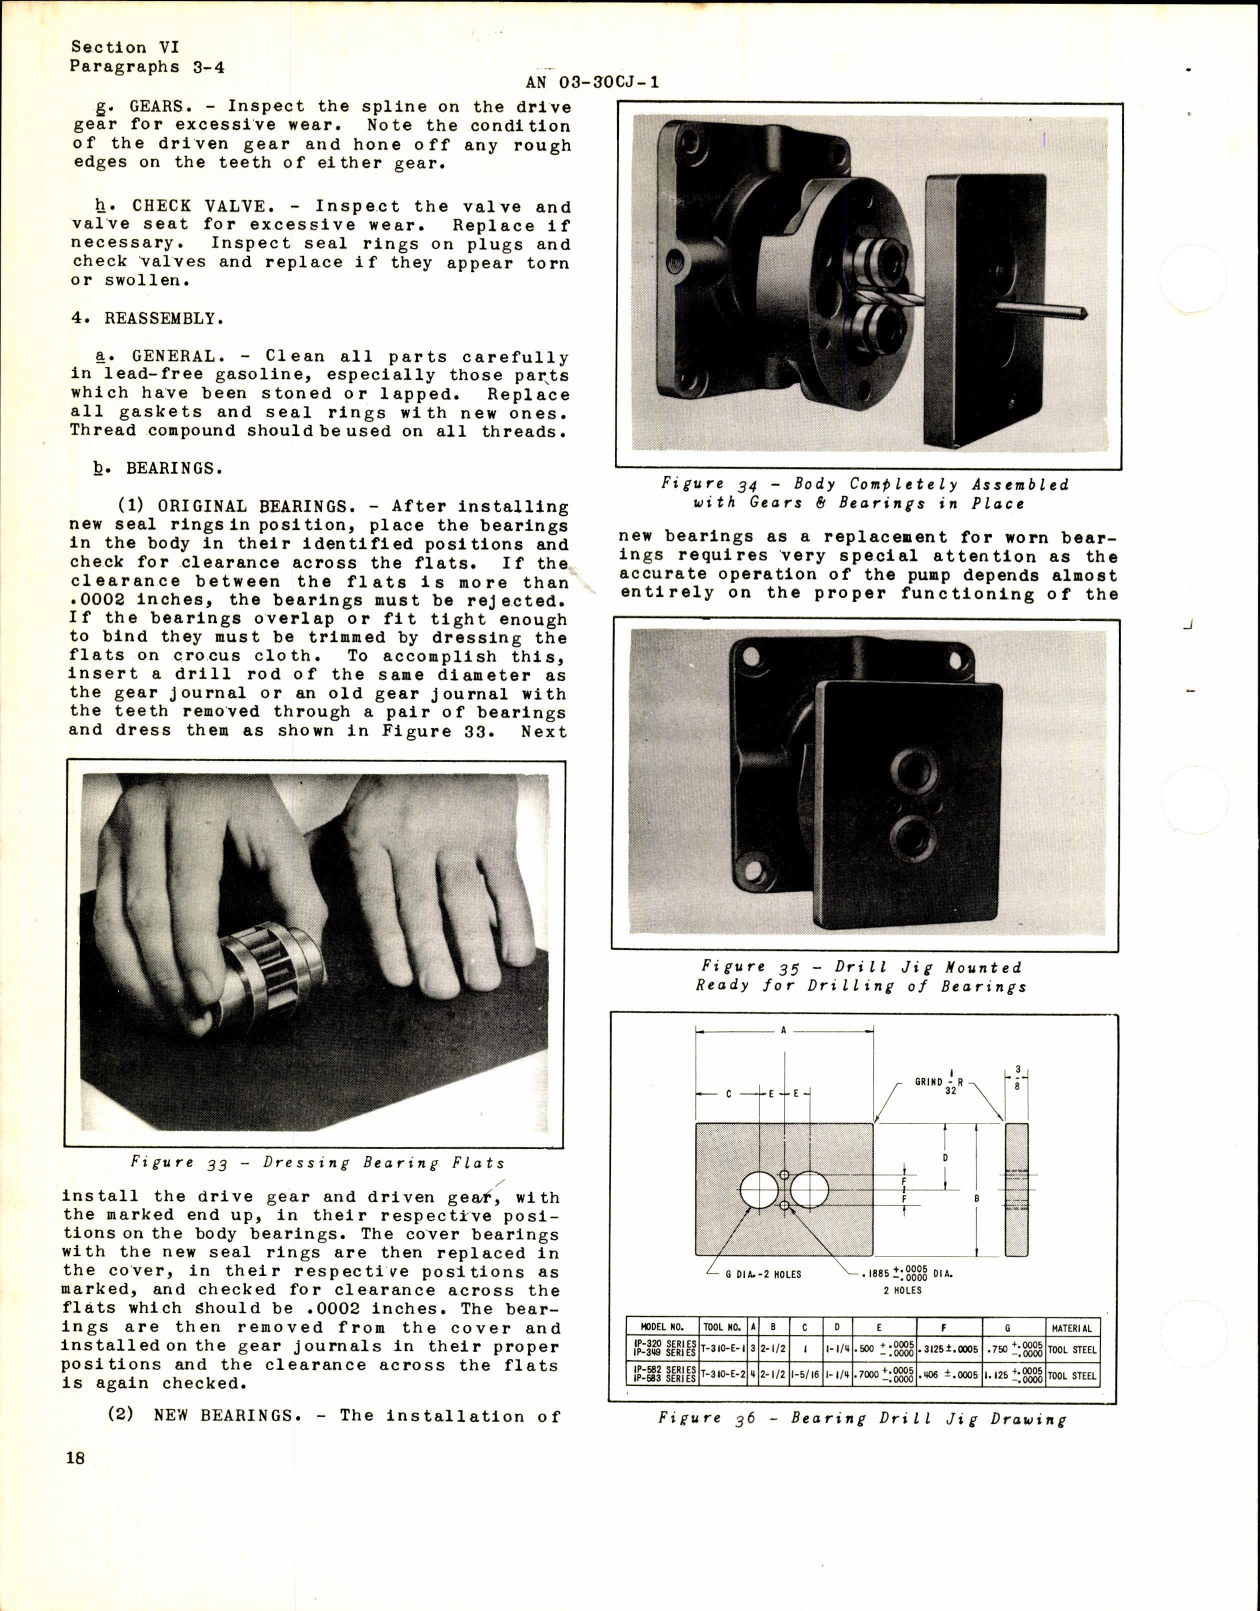 Sample page 4 from AirCorps Library document: Gear Type Hydraulic Pumps (Pesco)